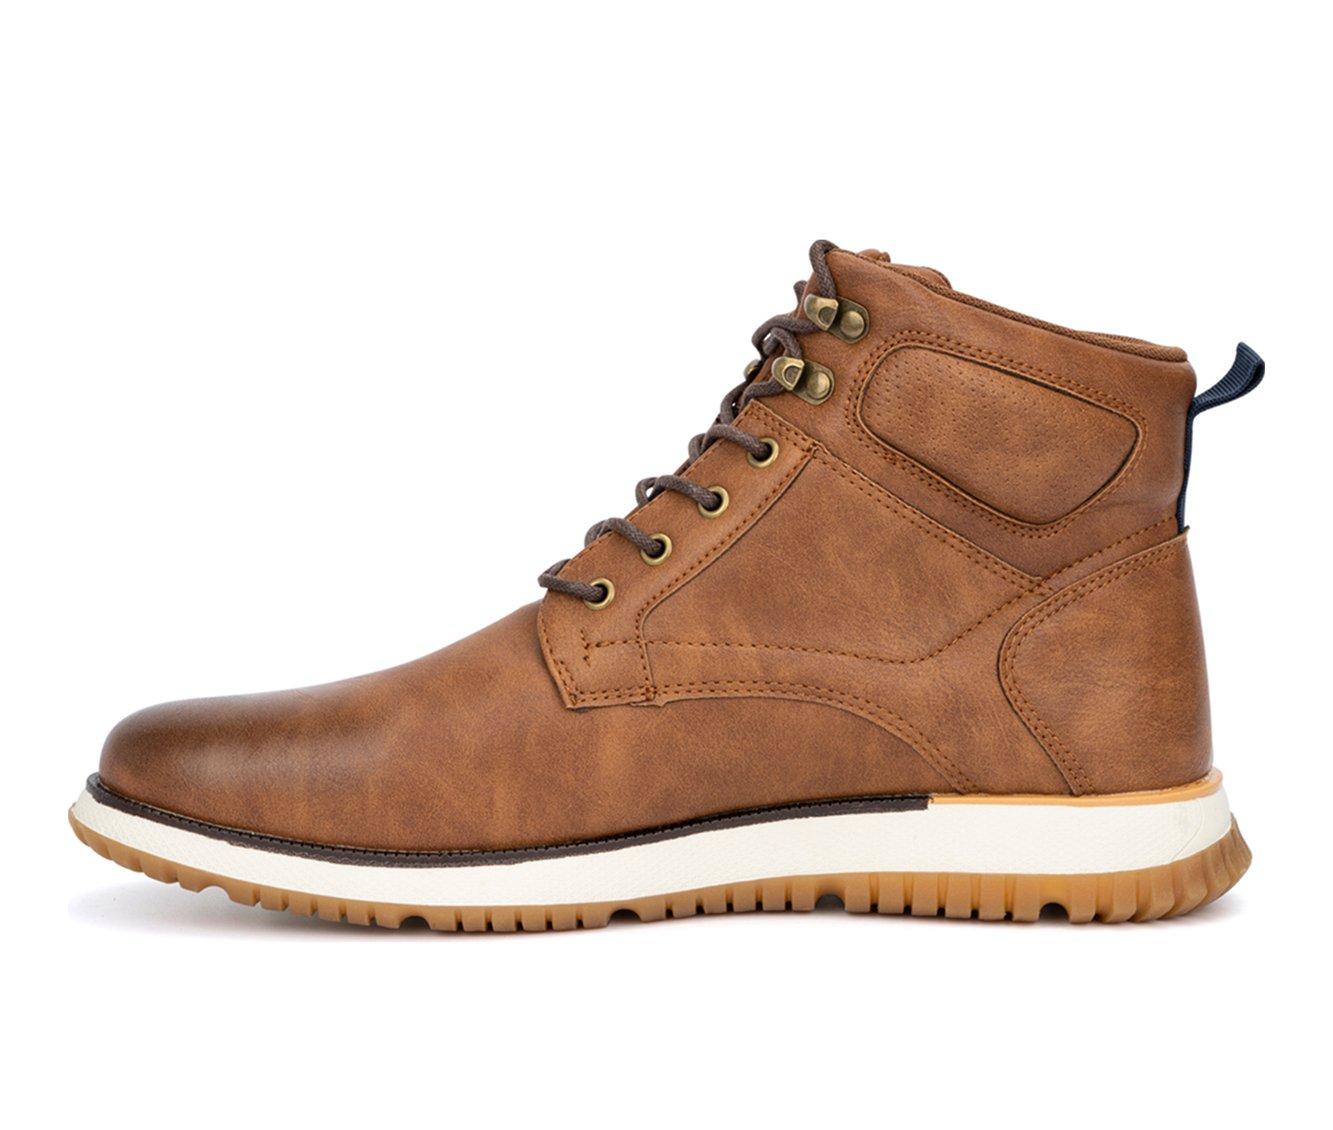 Men's New York and Company Gideon Lace Up Boots